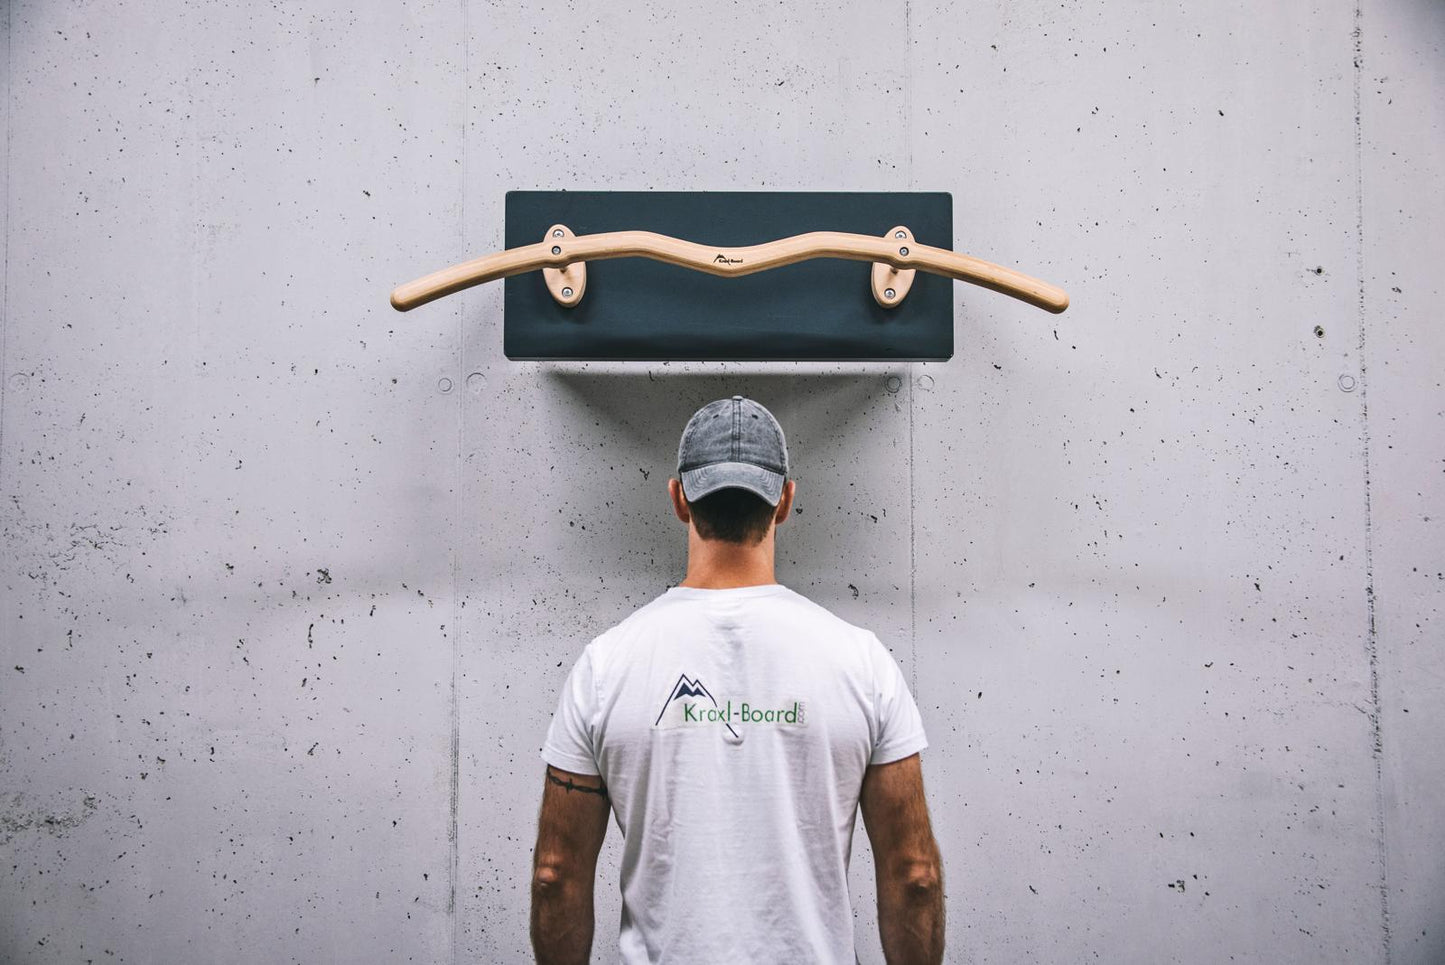 Snake Pull-Up Bar - for mounting on the wall